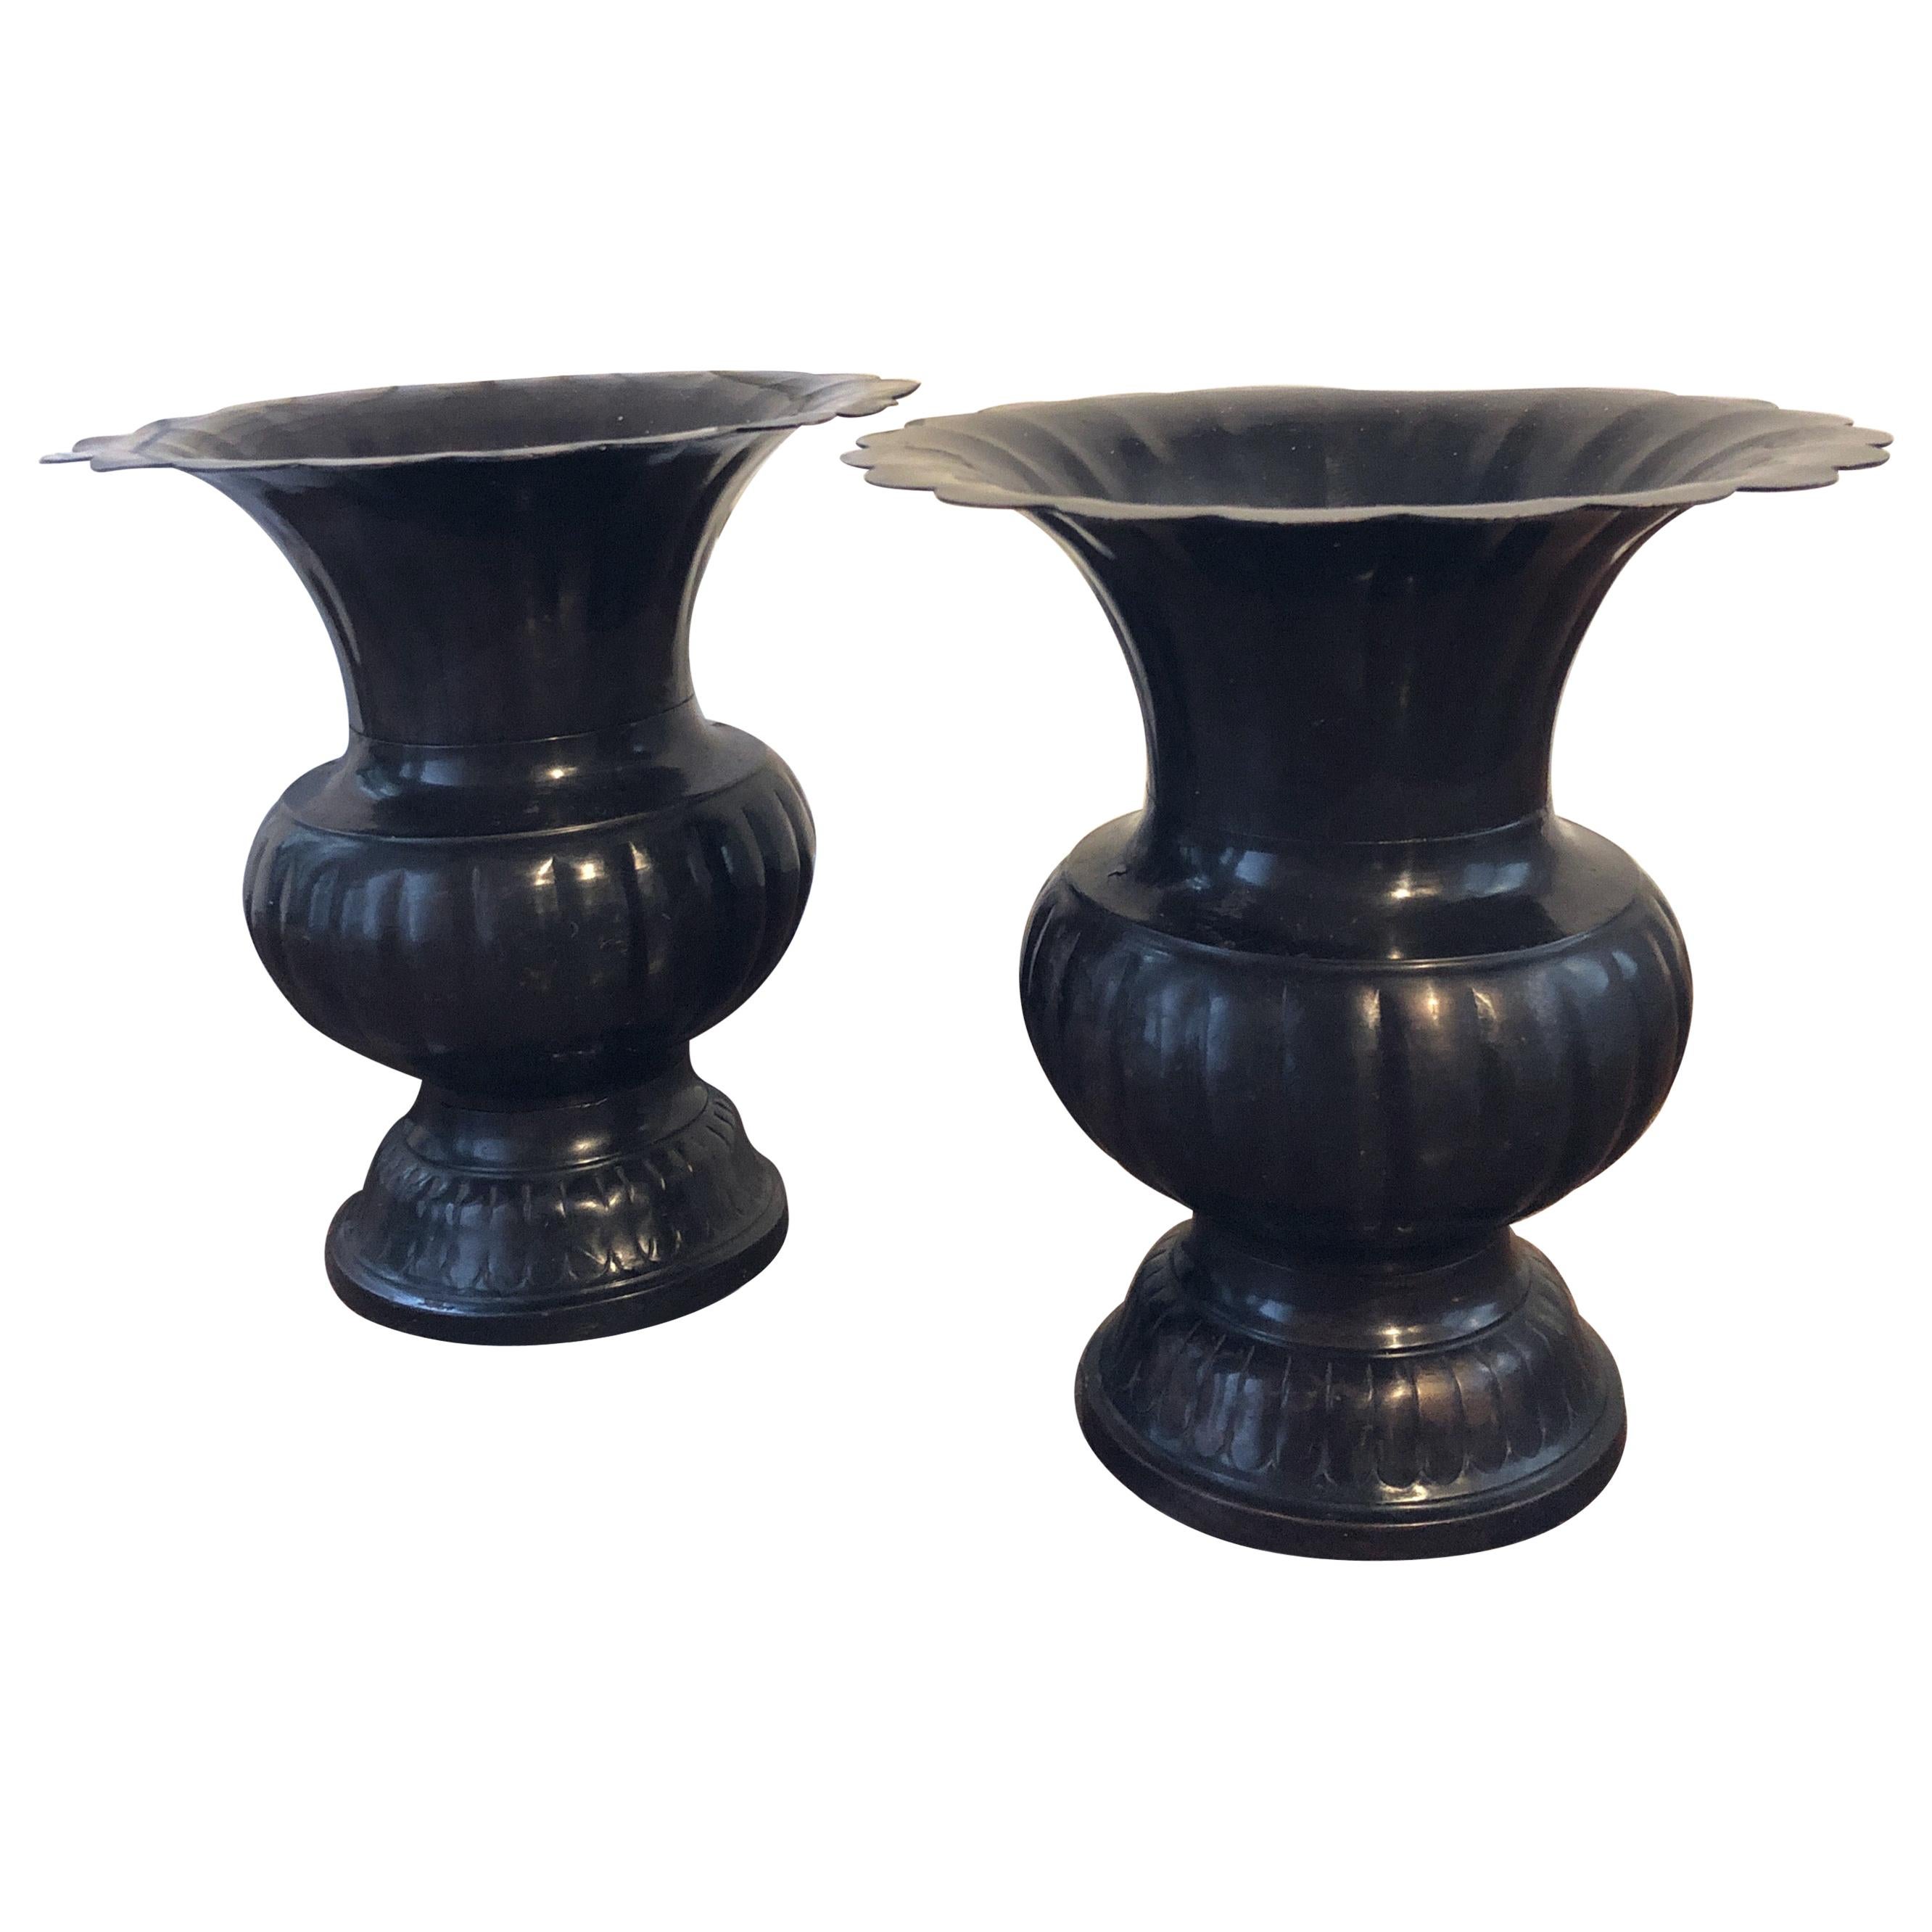 Pair of Late 19th-Early 20th Century Bronze Chinese Gu Vases/Vessels For Sale